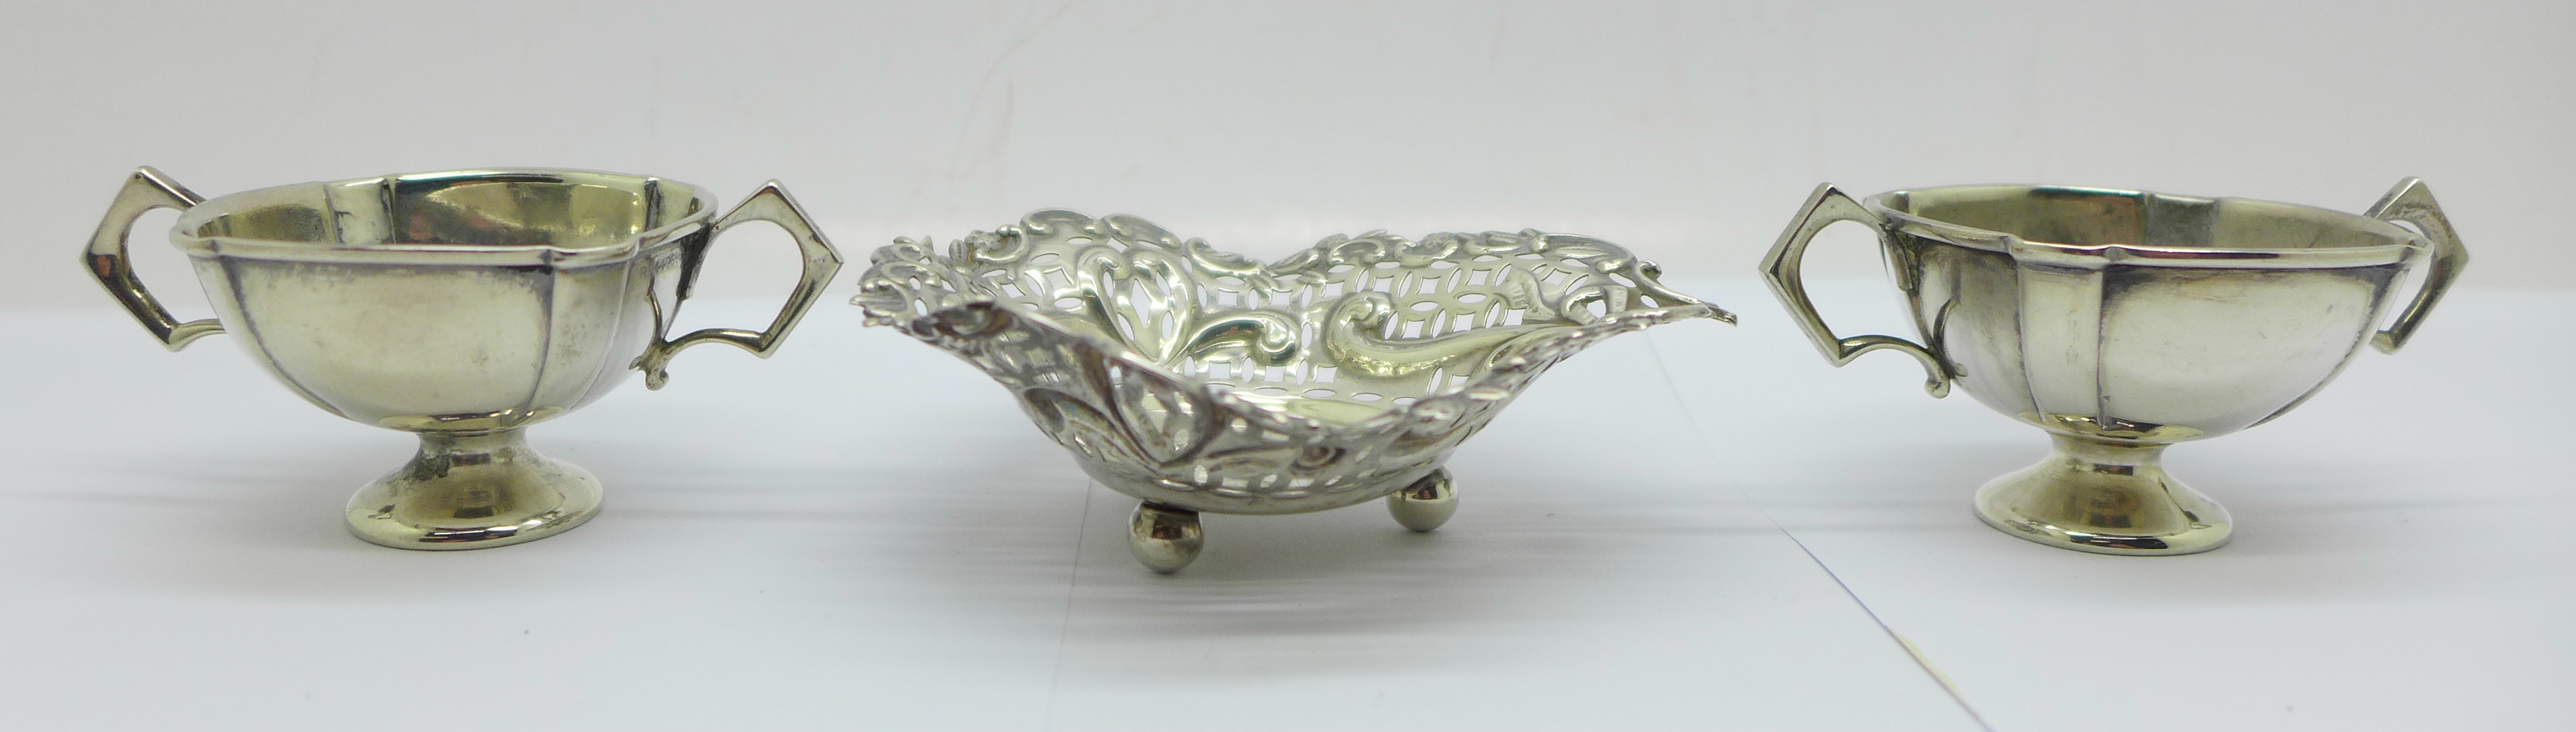 A pierced silver dish and a pair of silver salts, 73g - Image 2 of 2